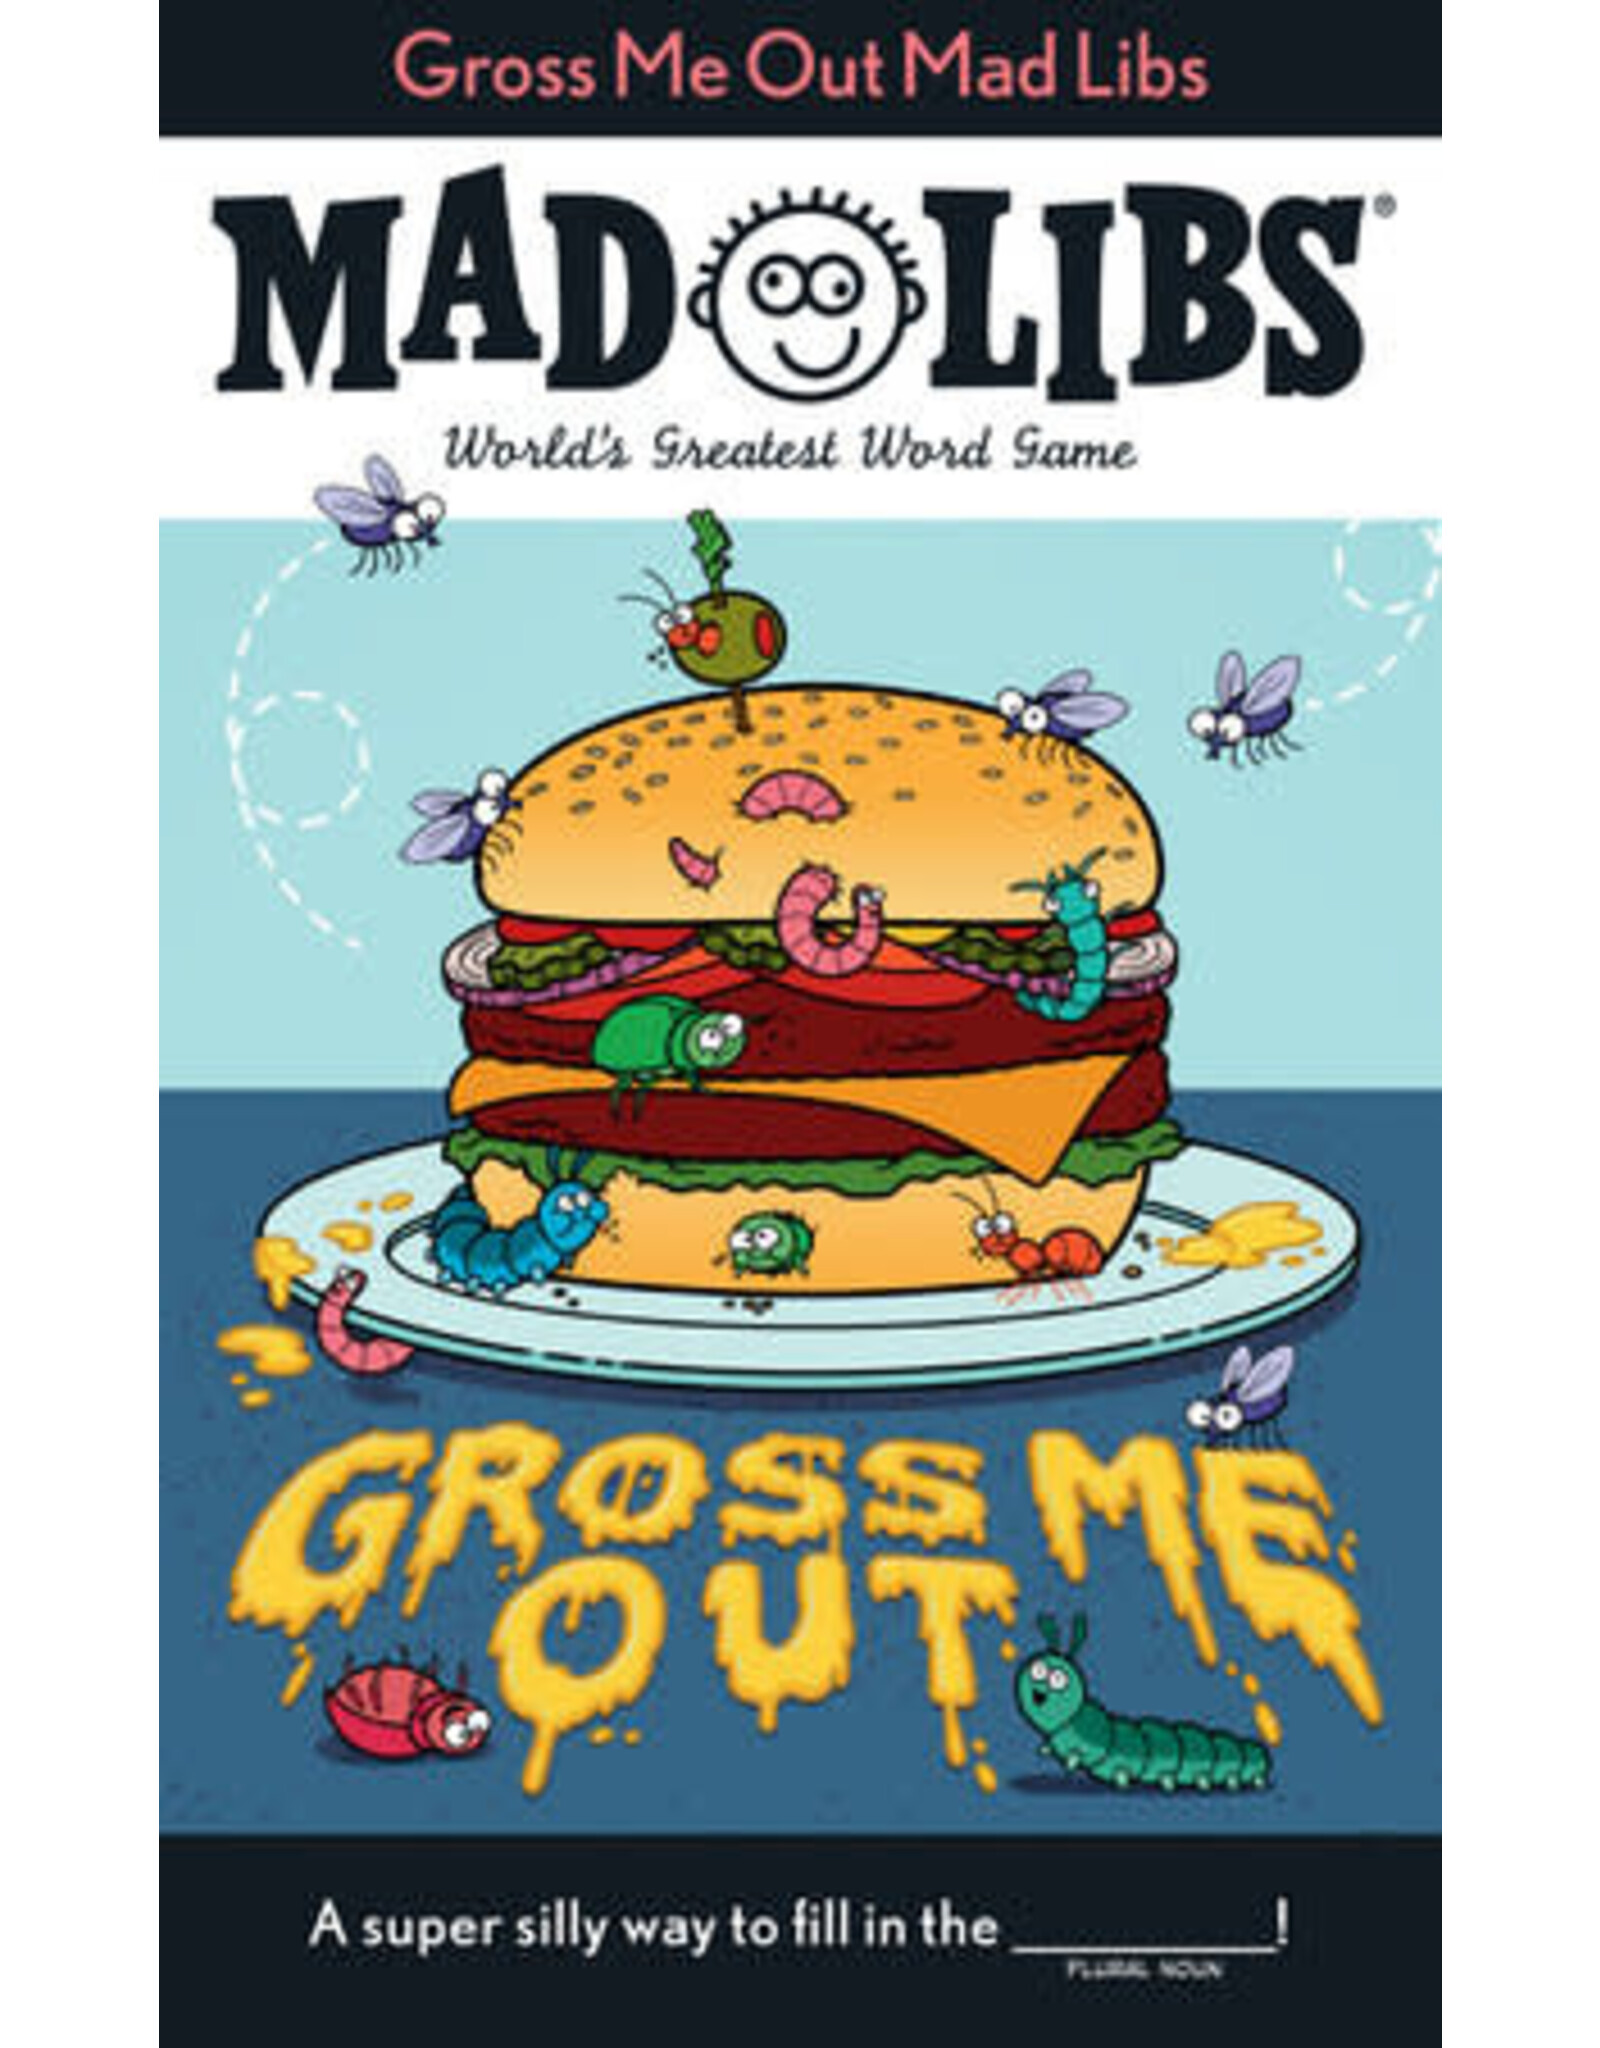 Mad Libs Gross Me Out Mad Libs